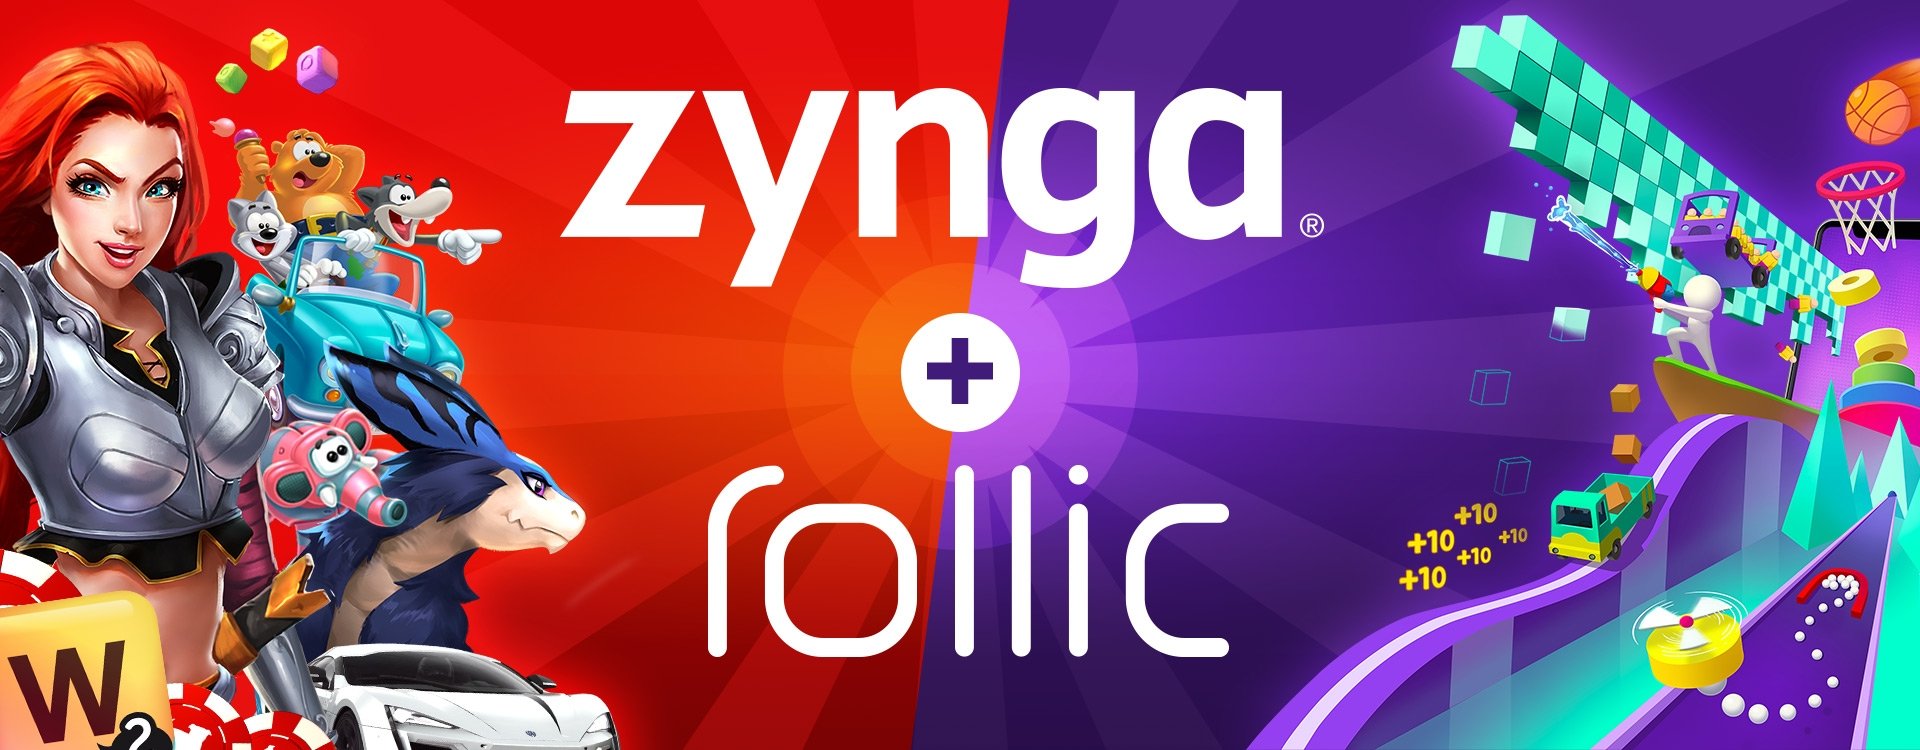 Zynga to Buy Peak for $1.8 Billion in Its Largest Deal Ever ...